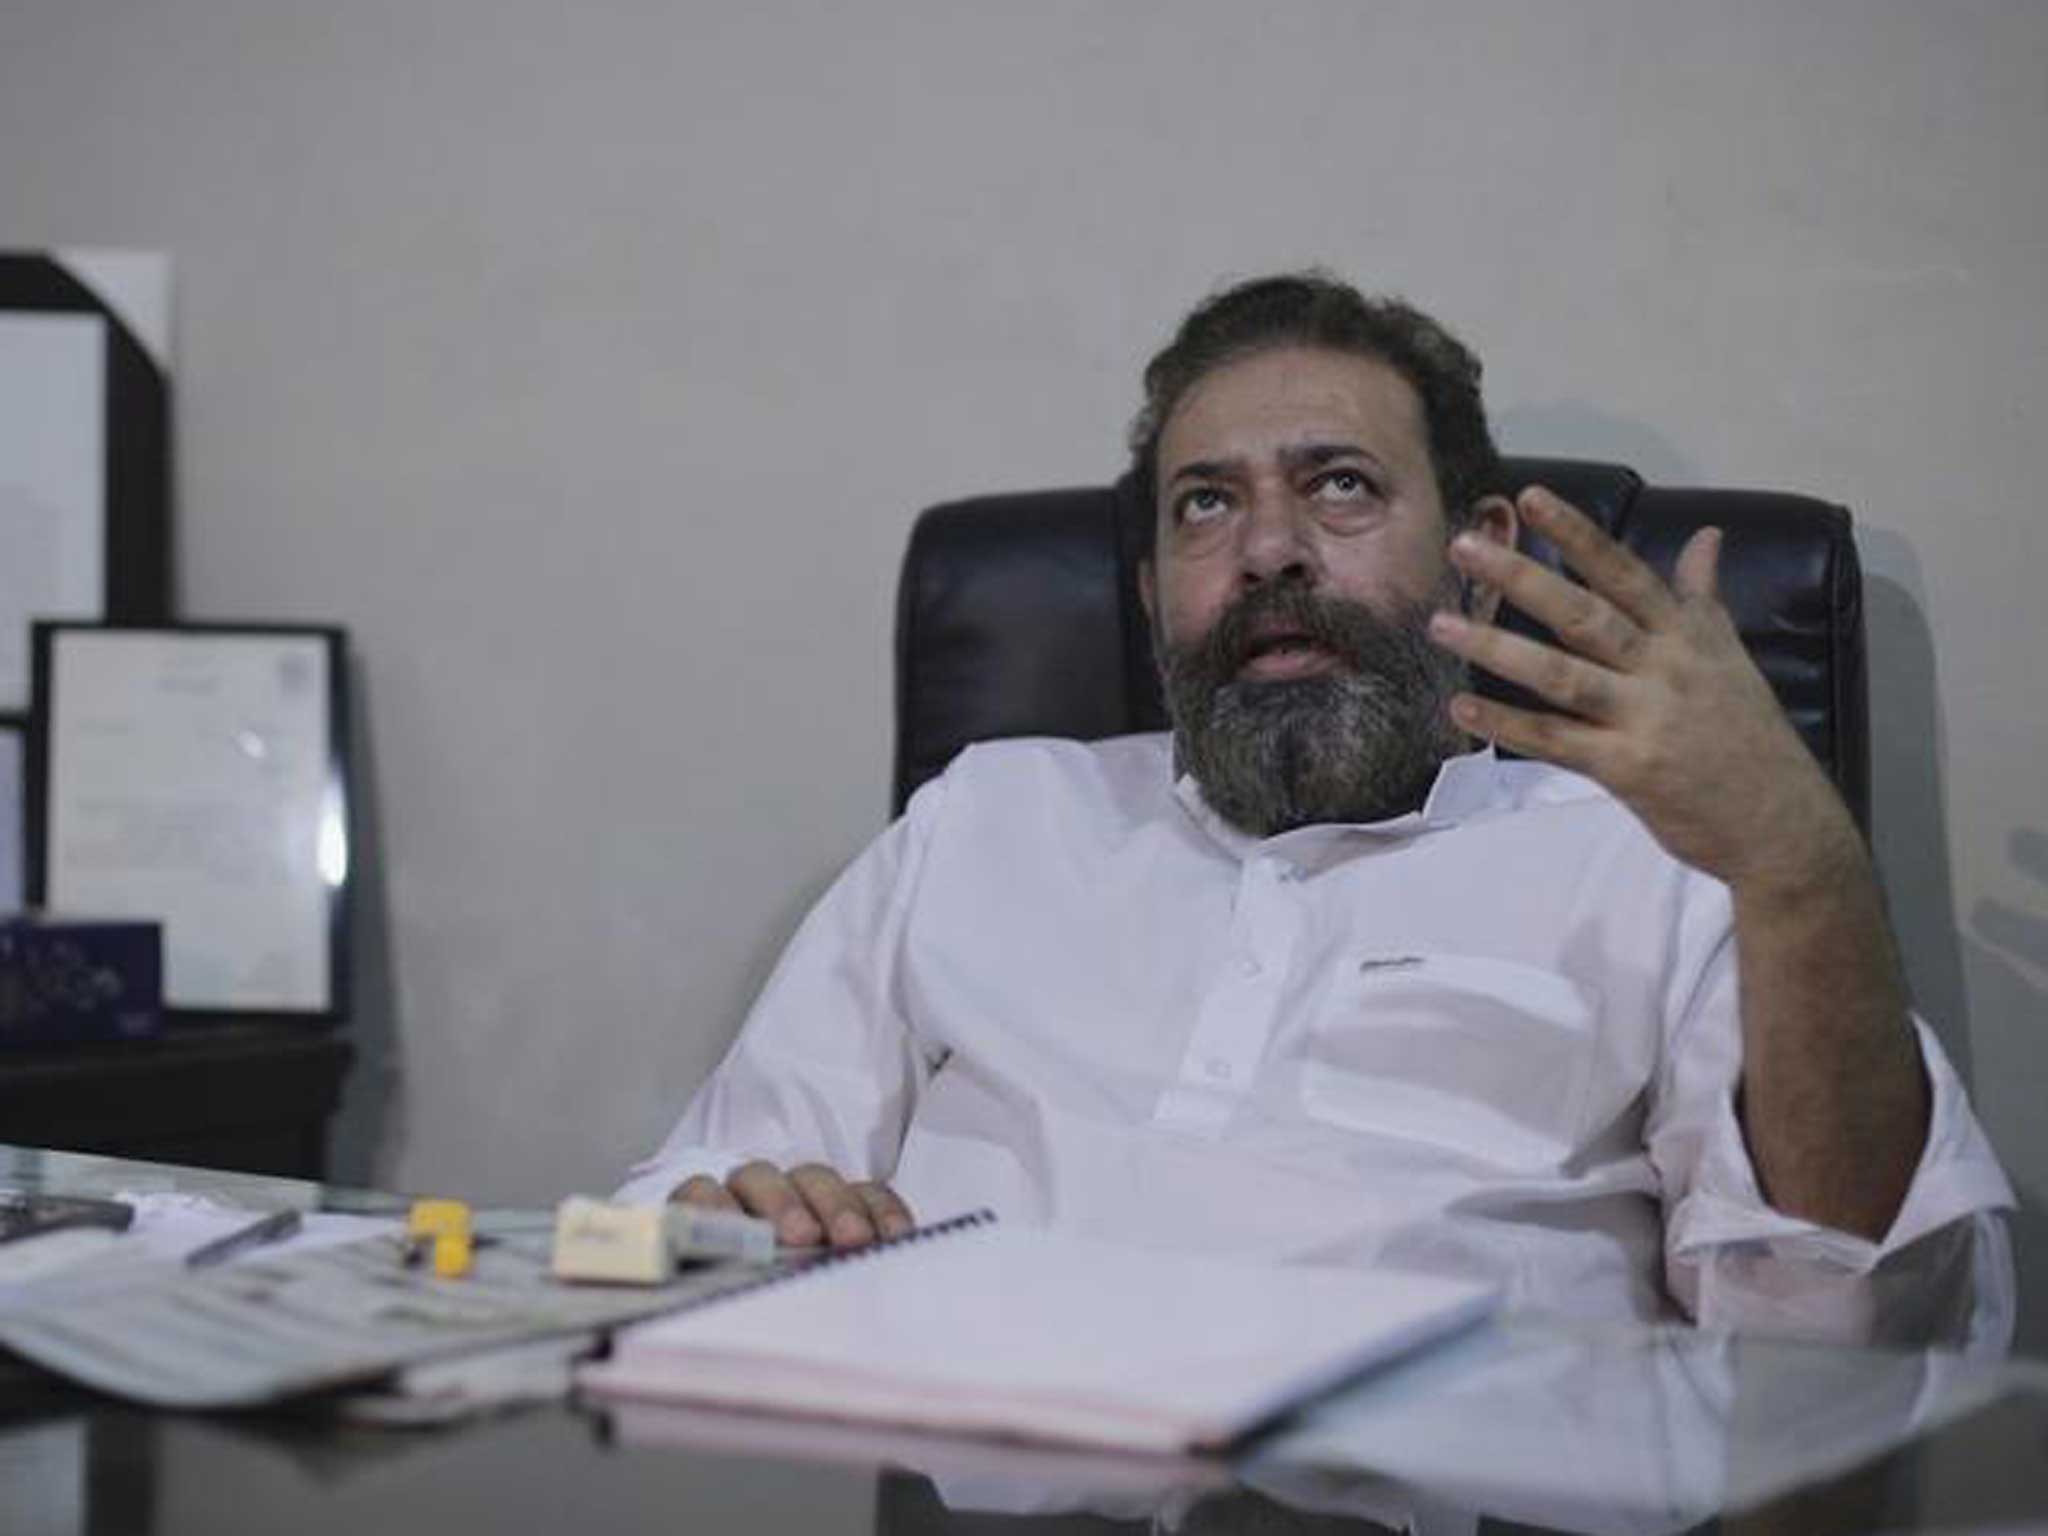 Chaudhry Aslam Khan was renowned for taking on the bad guys in Karachi